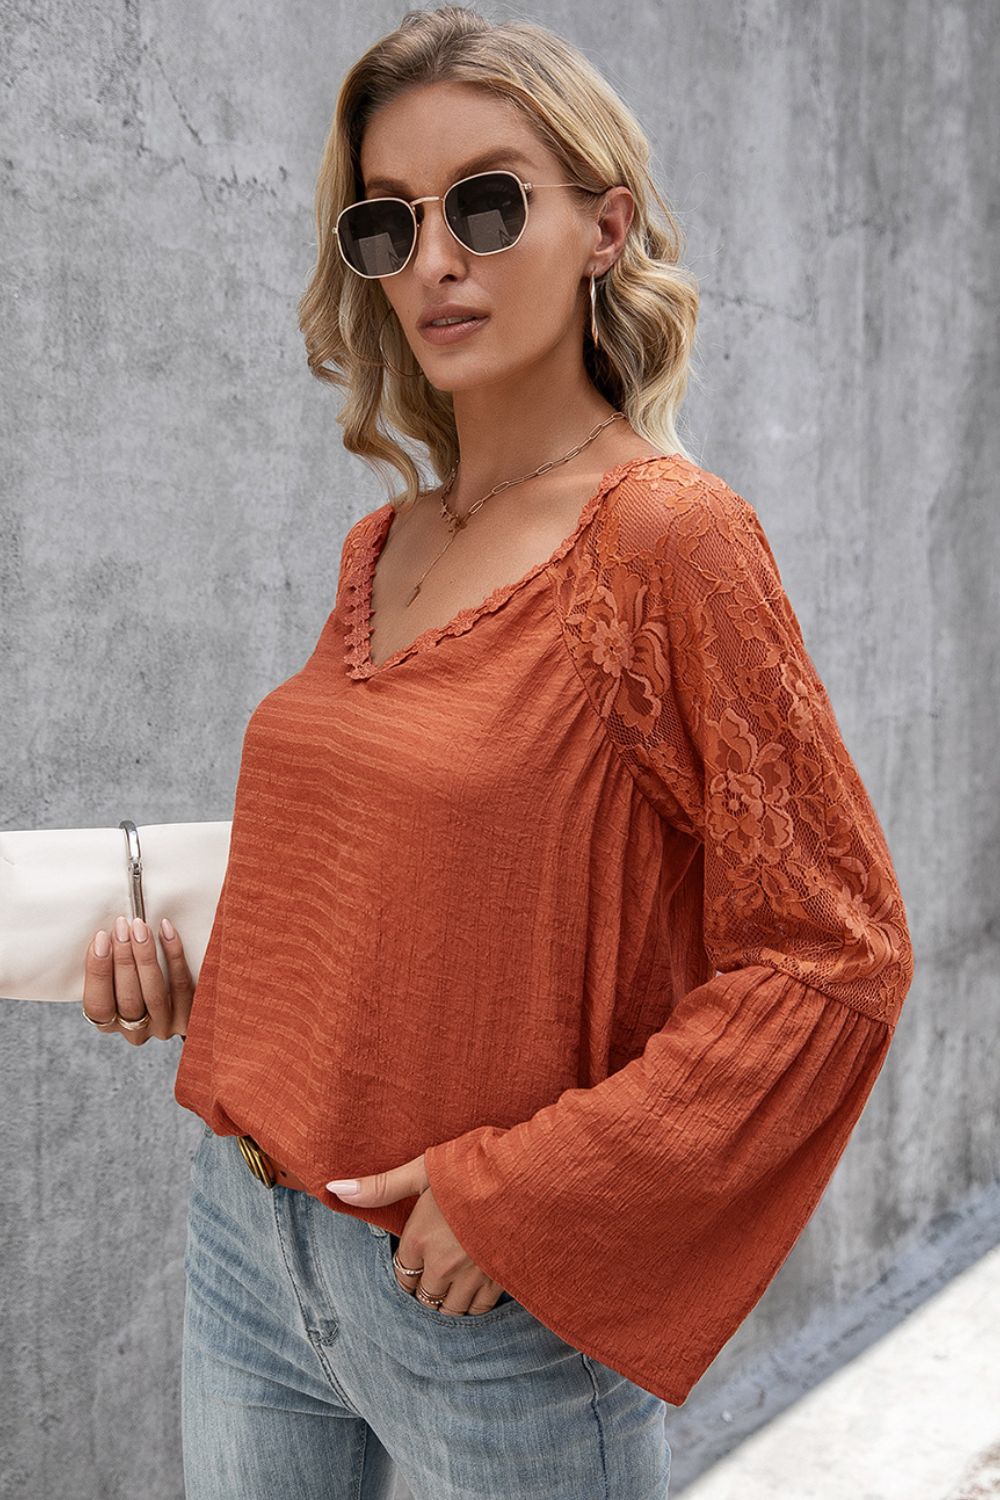 V-Neck Spliced Lace Flare Sleeve Top - Online Only